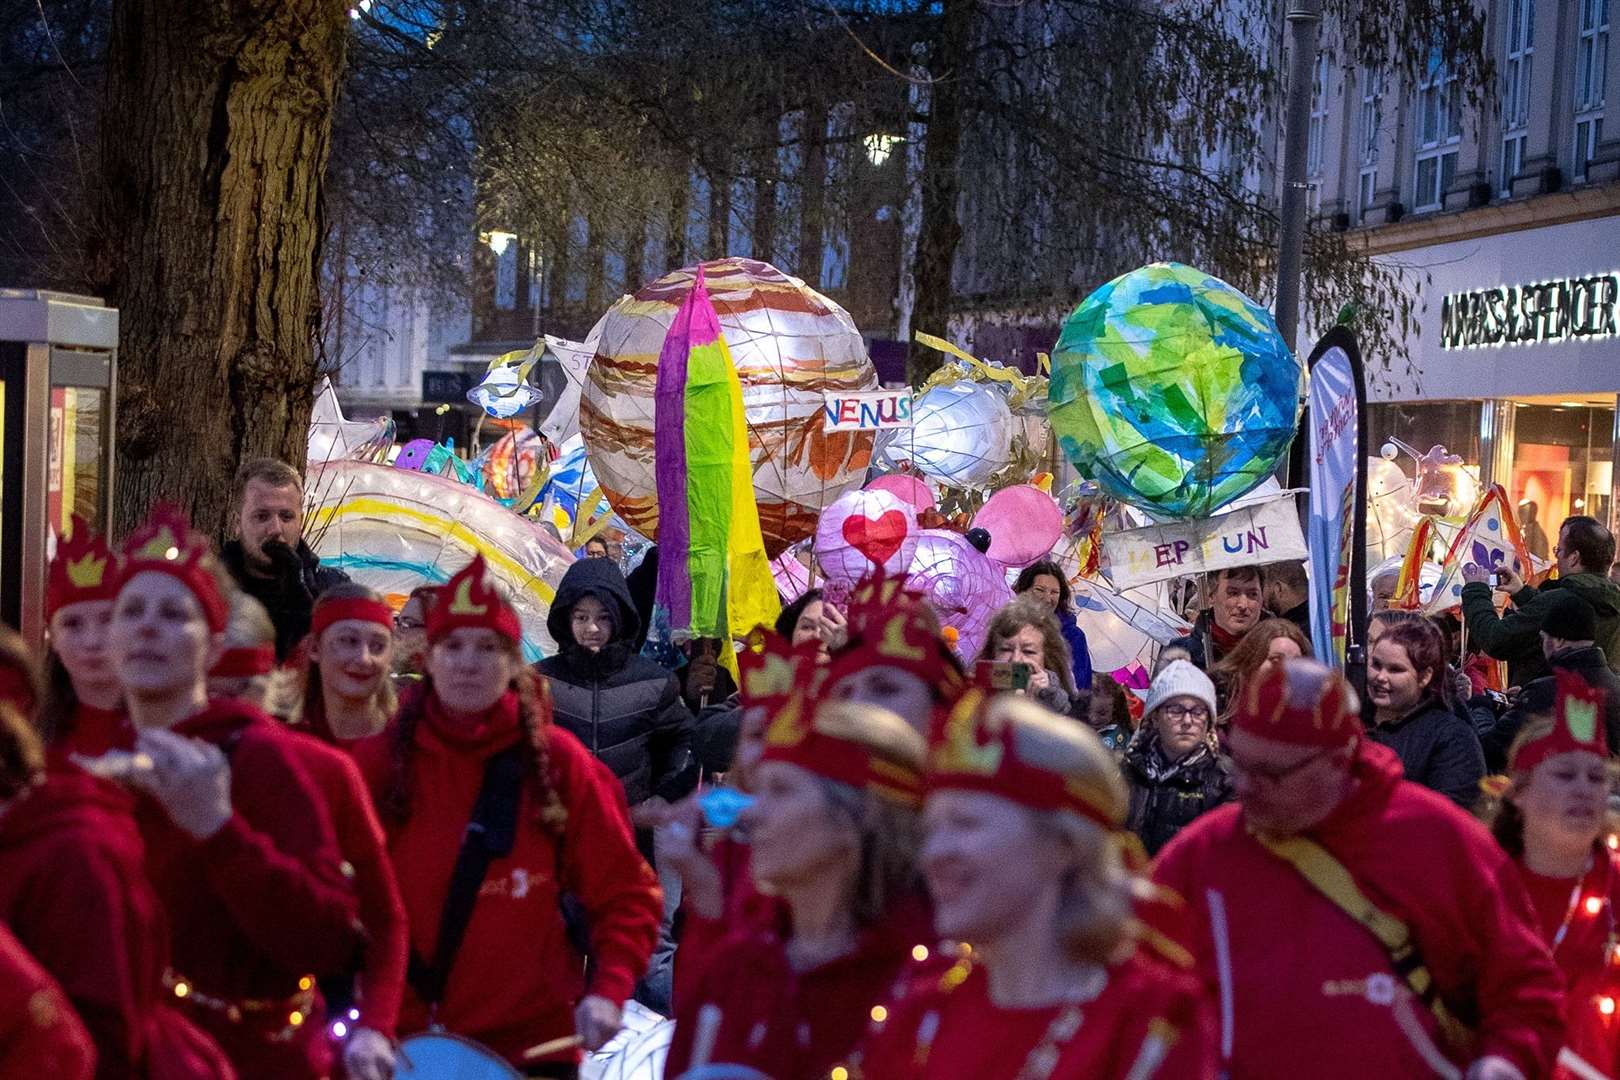 The lantern parade is on Saturday evening. Picture credit: Capture Me Happy